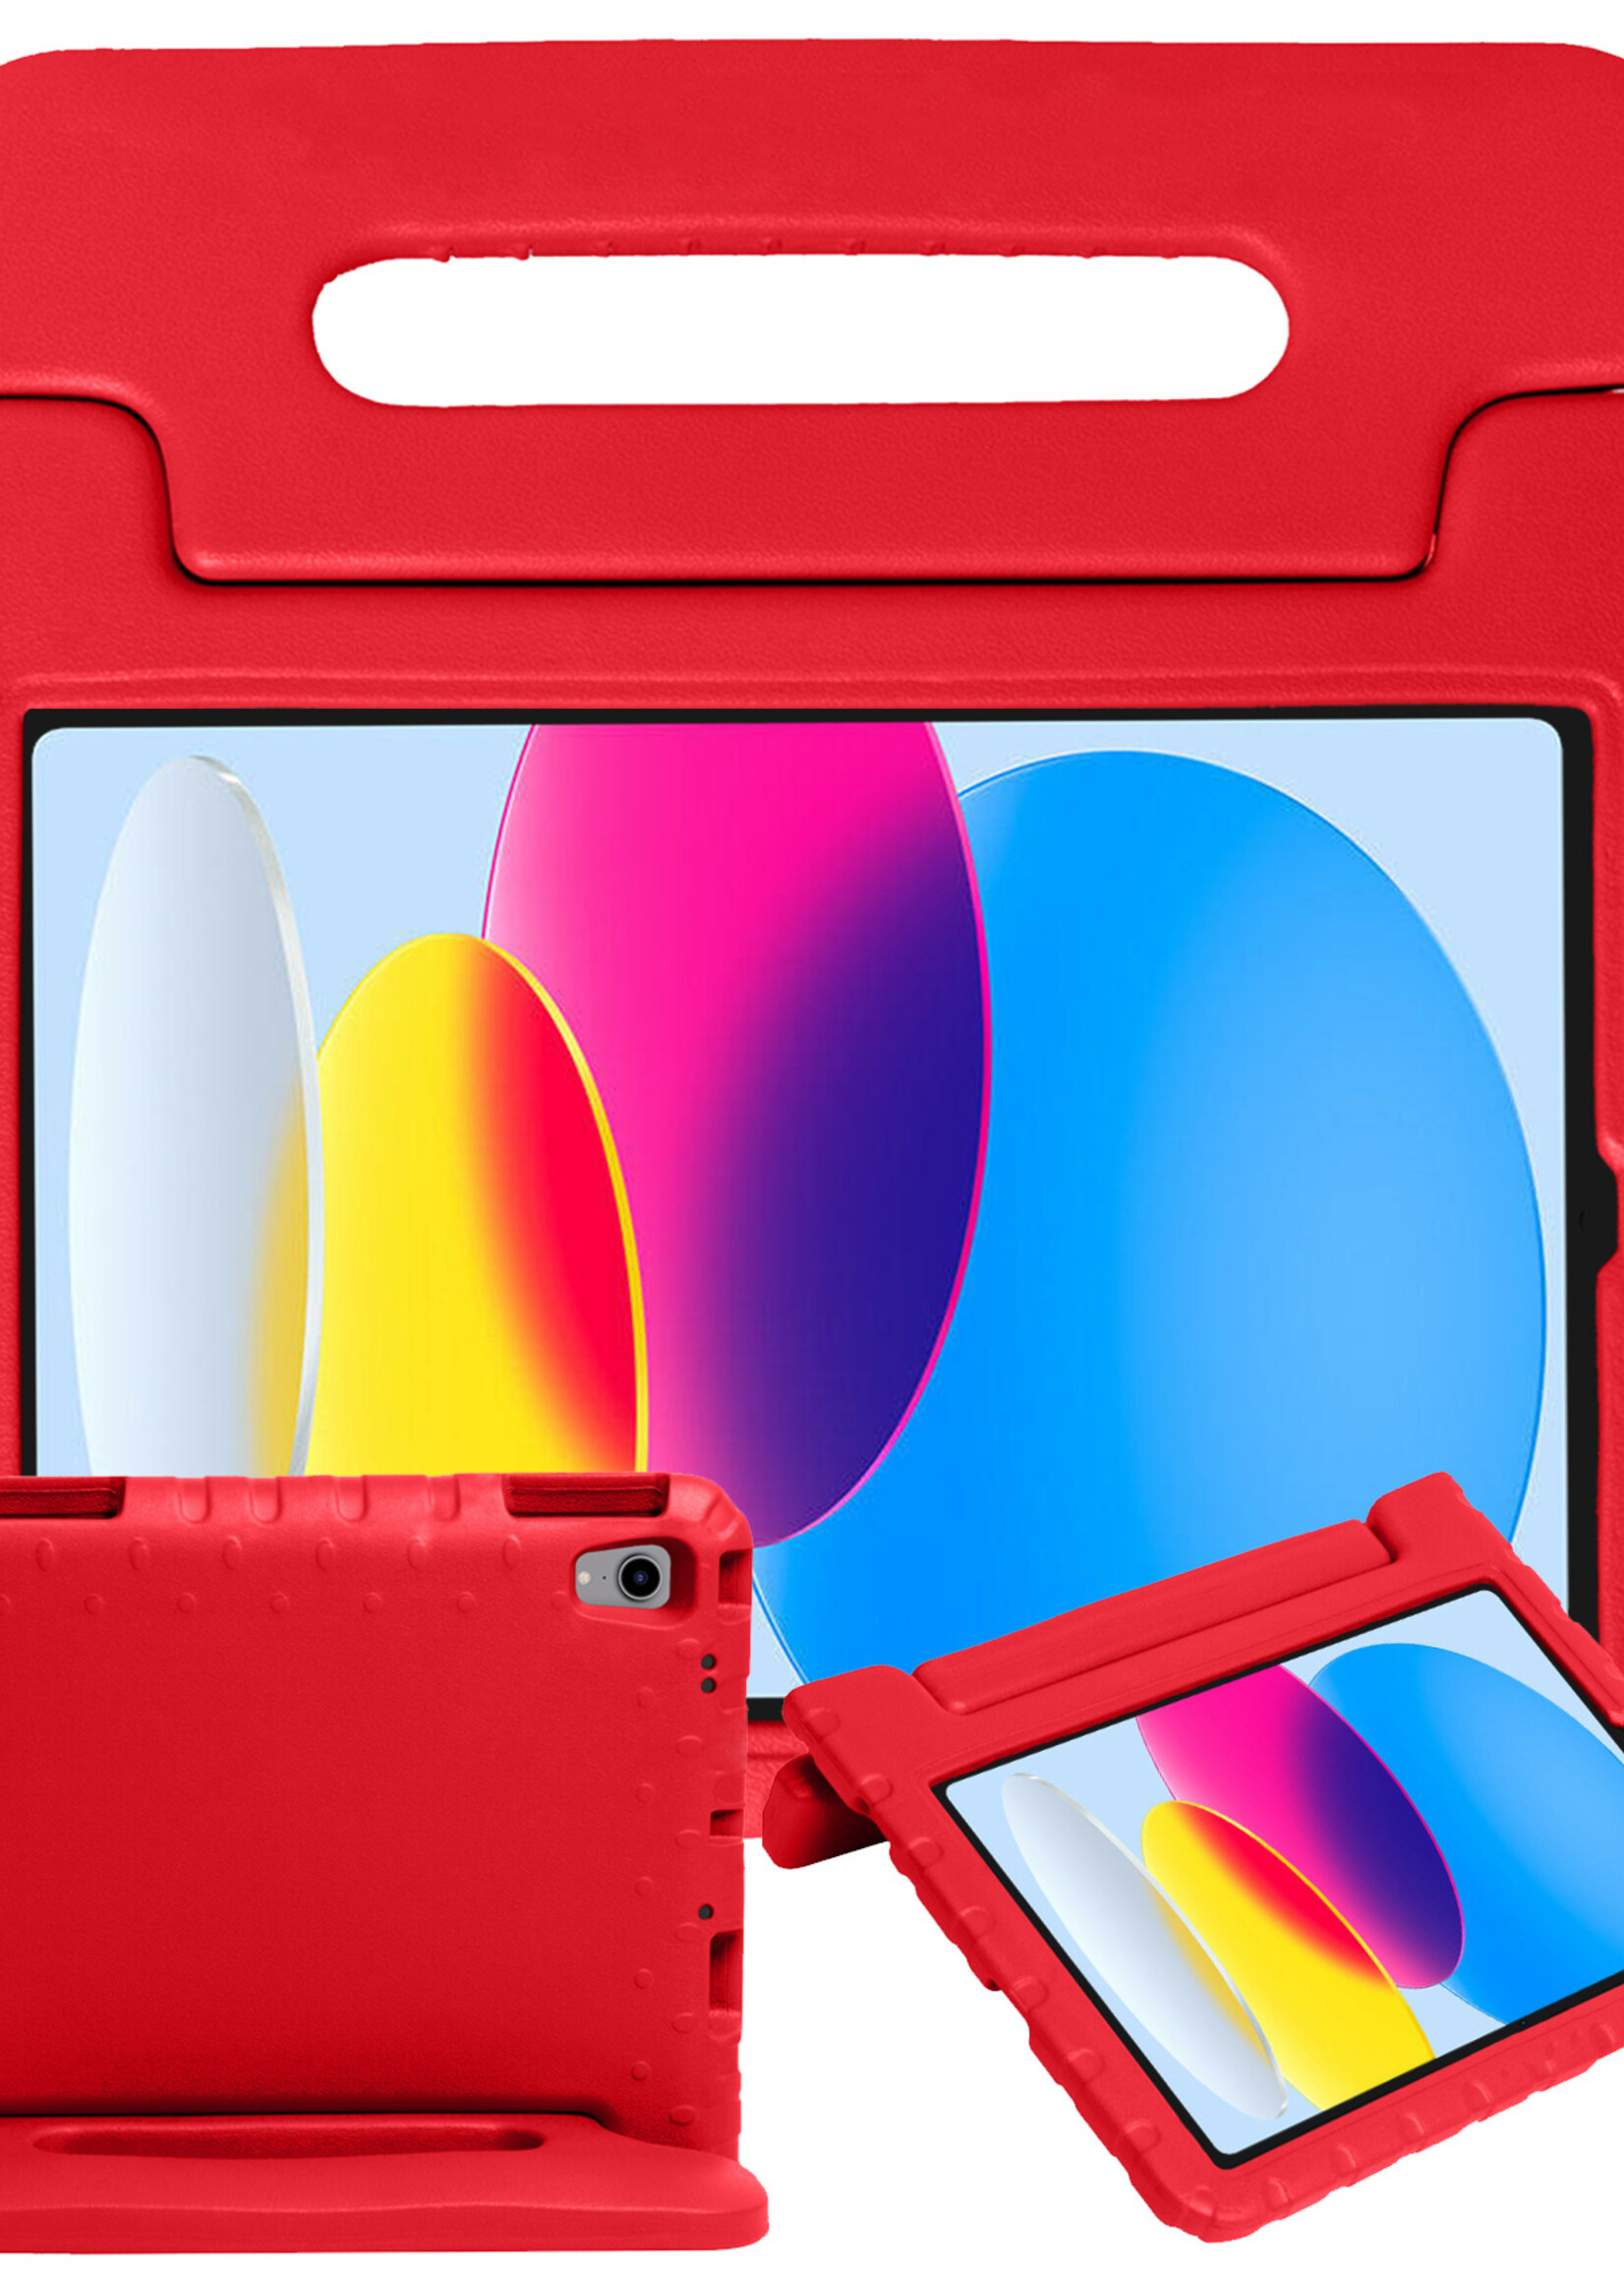 BTH iPad 2022 Hoes Kinder Hoesje Kids Case Cover Kids Proof - iPad 10 2022 Hoesje Kinder Hoes - Rood